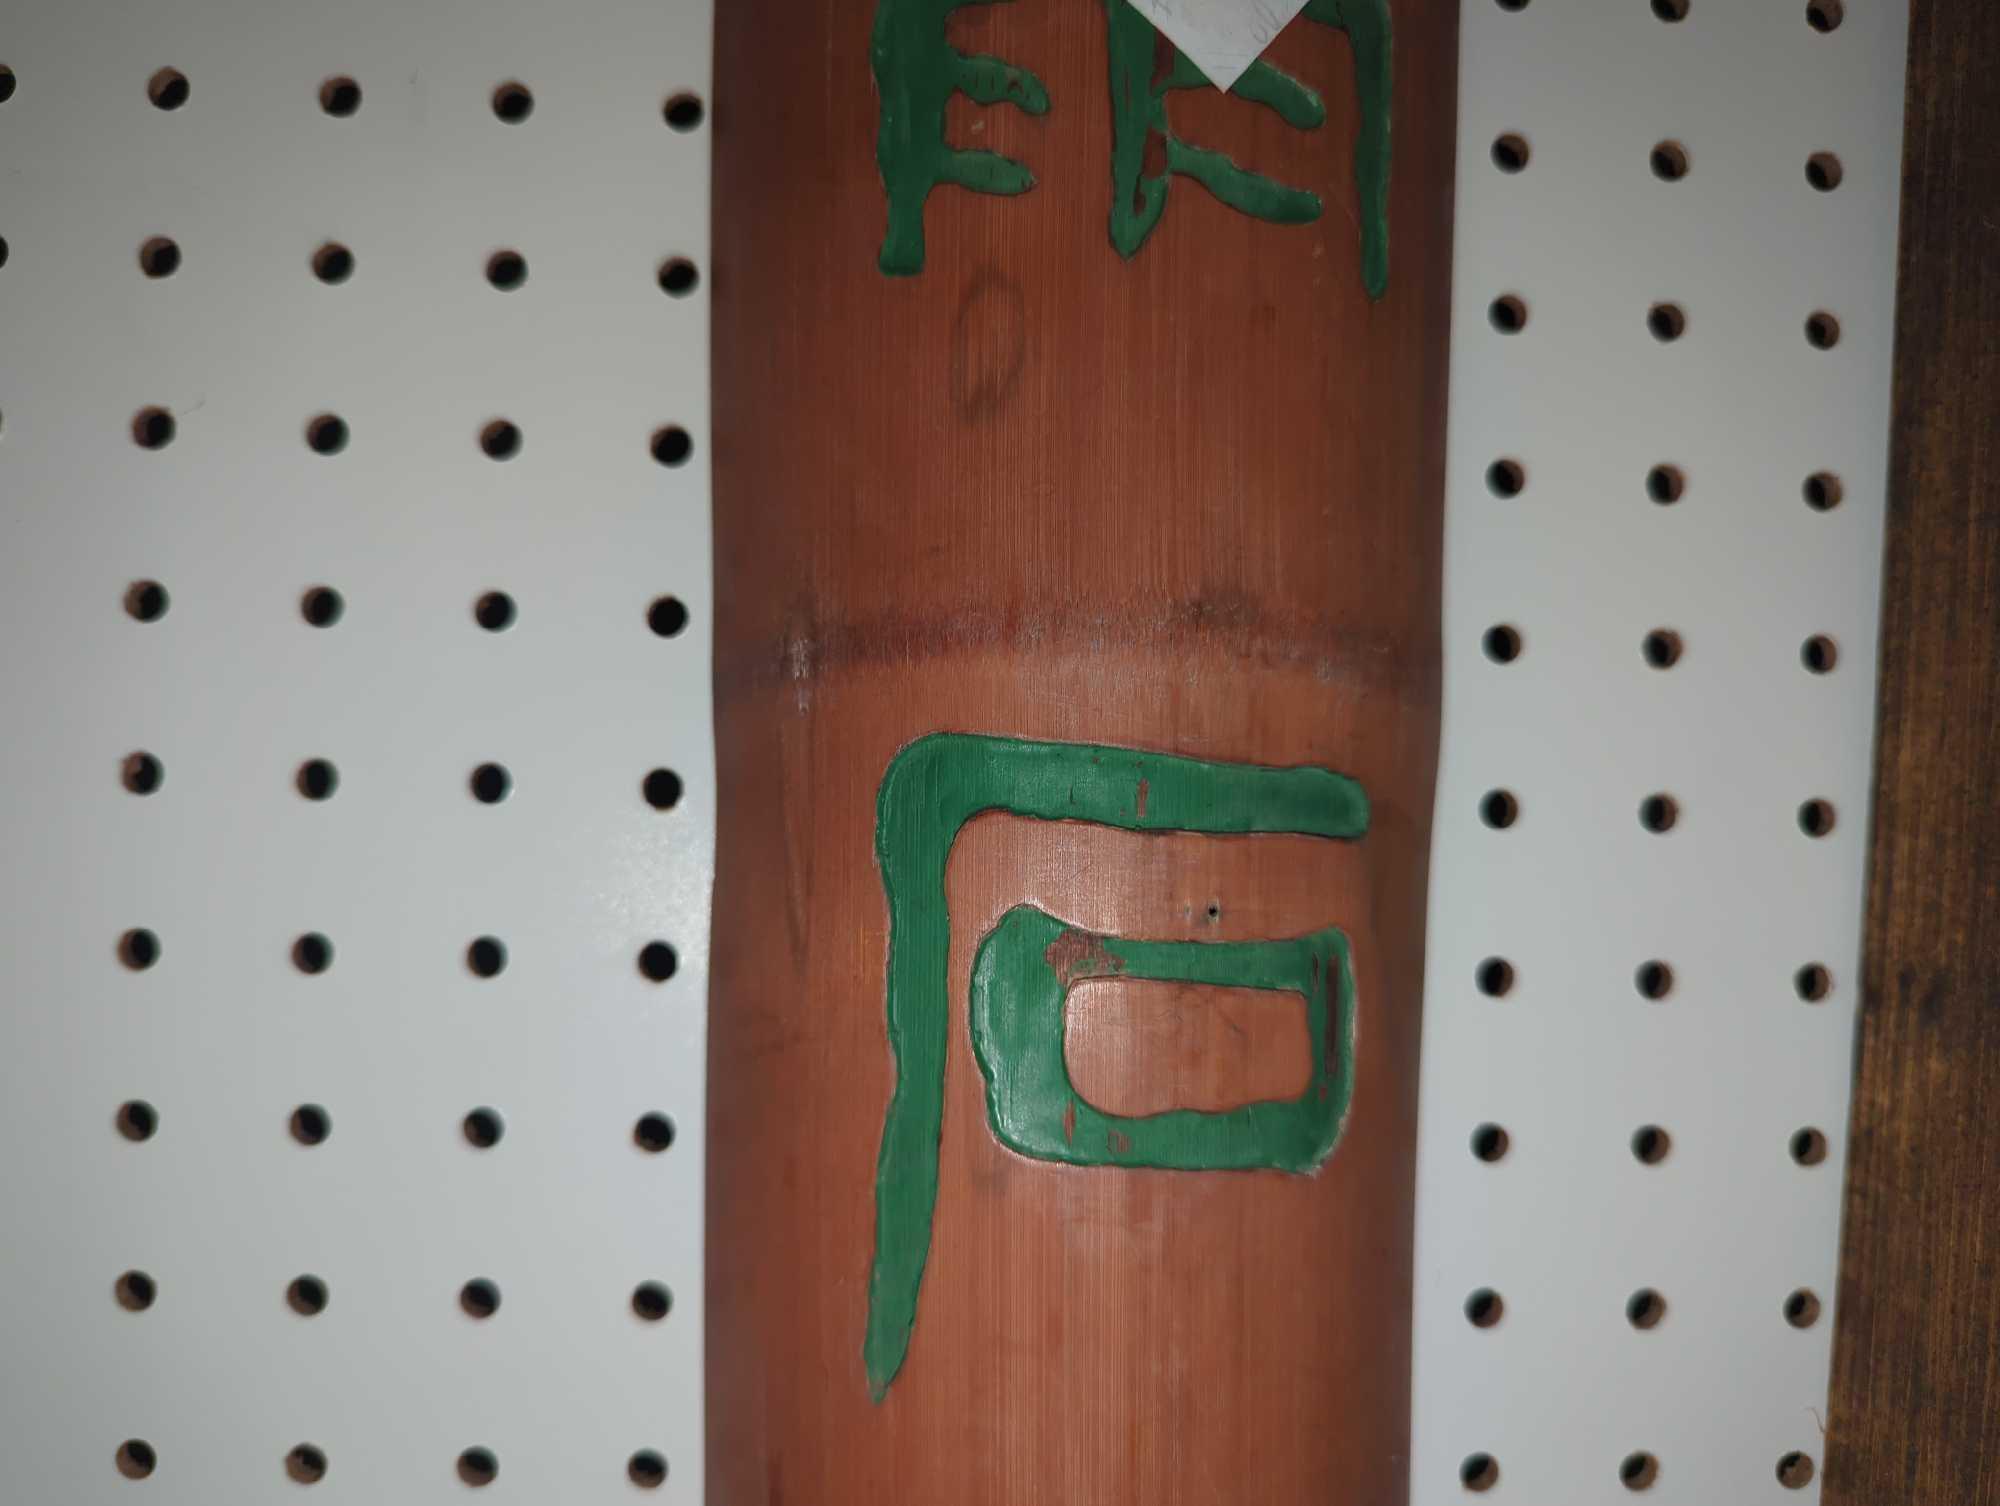 Lot of 2 Bamboo Wall Decorations with Carved Chinese Symbols, Approximate Dimensions - 32" x 5",